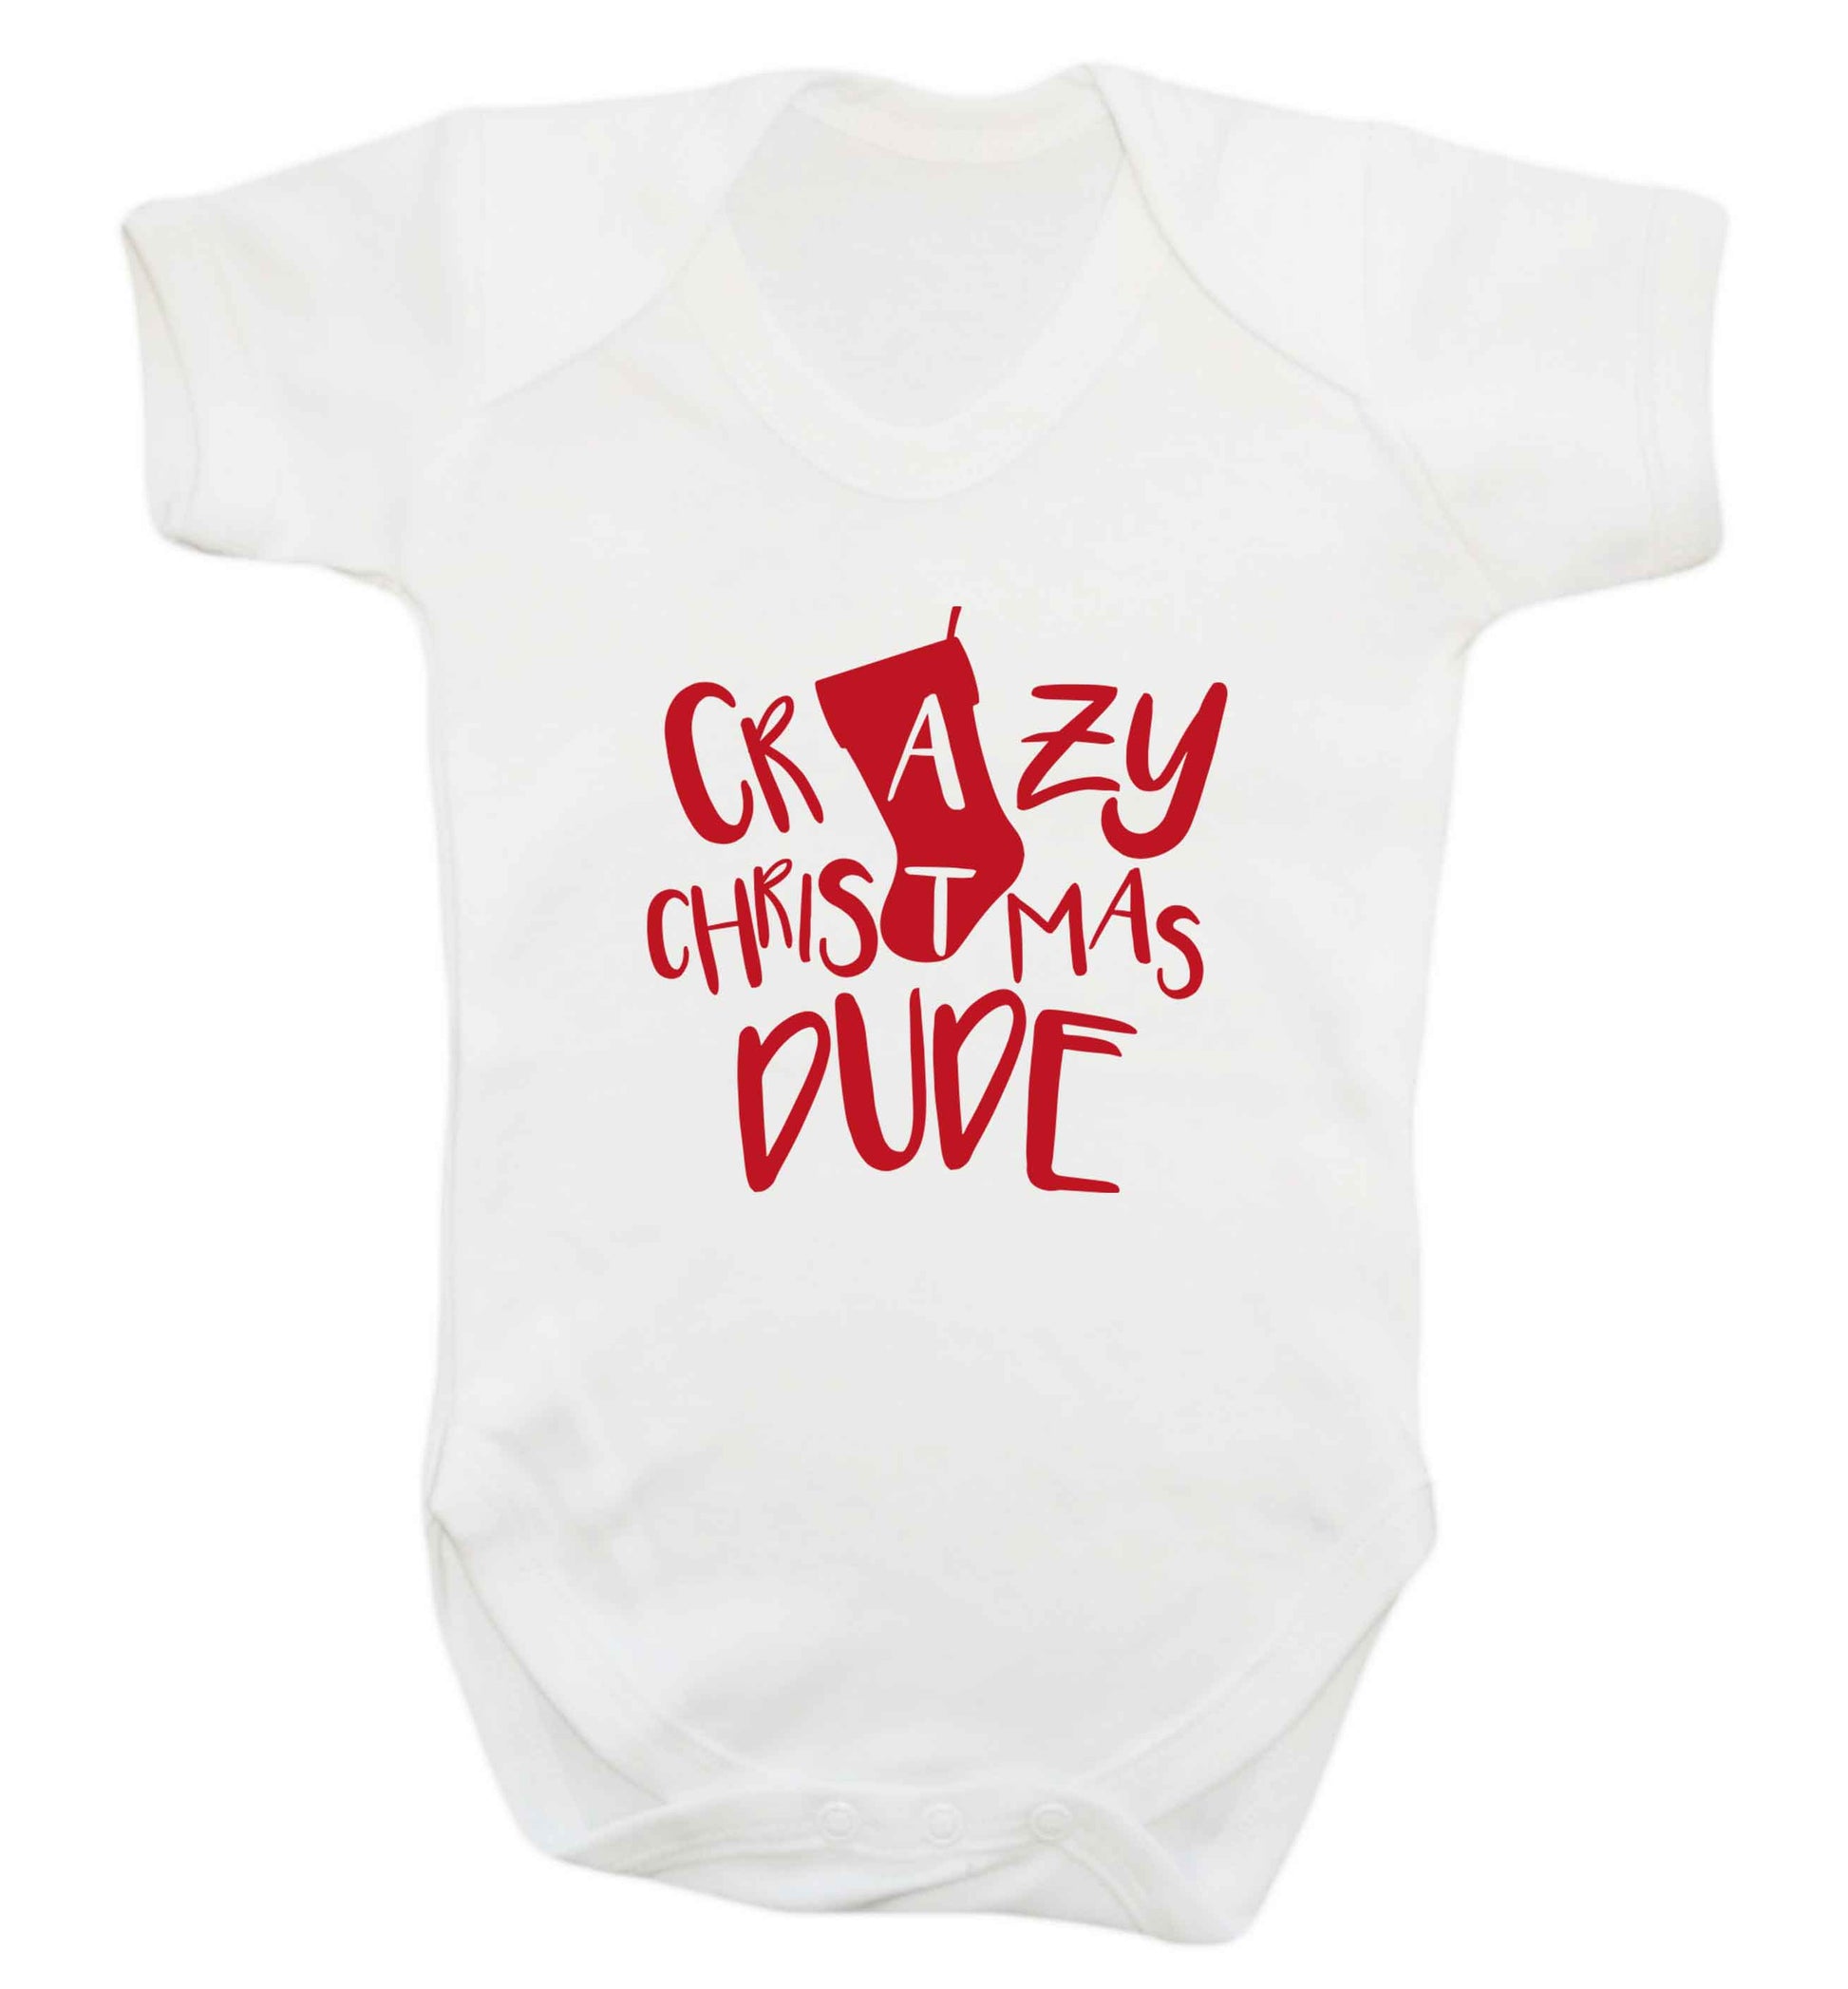 Crazy Christmas Dude baby vest white 18-24 months